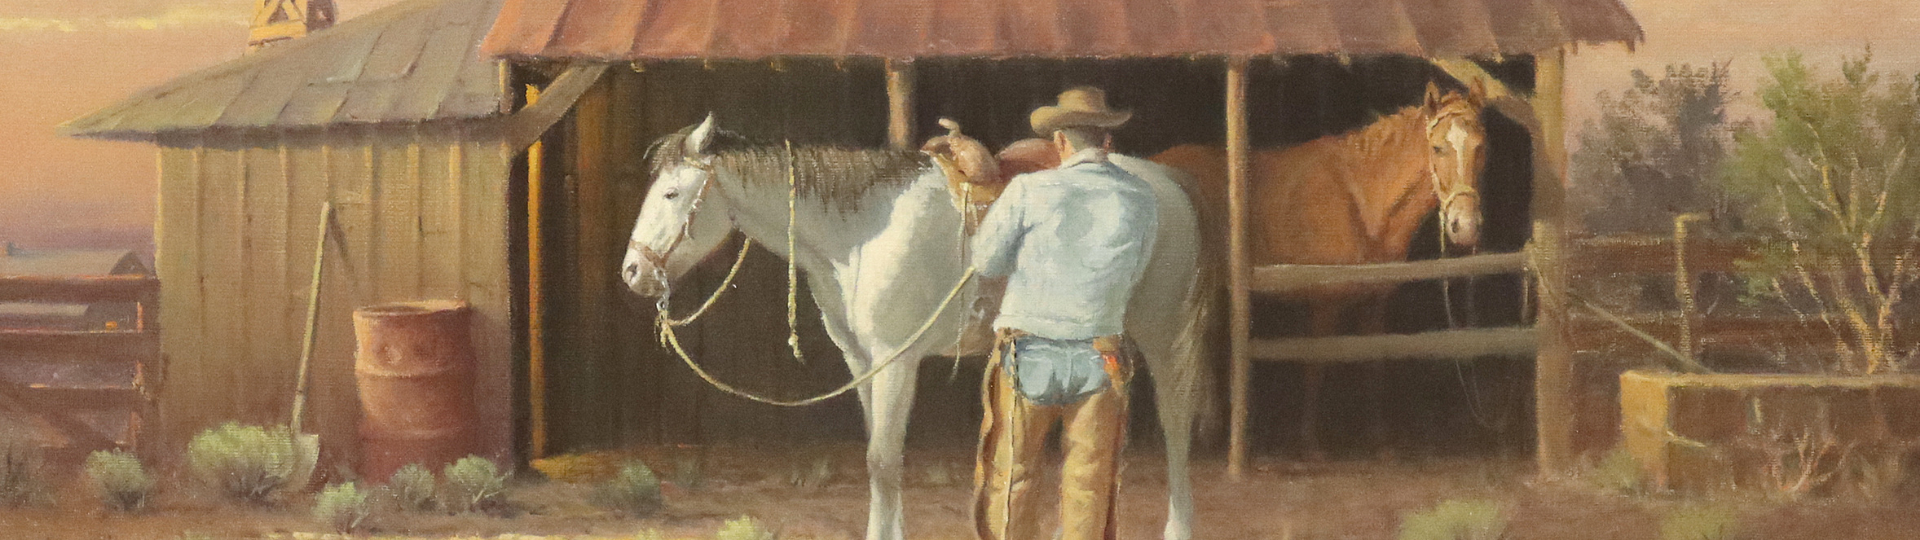 WESTERN ART, NATIVE AMERICAN, FIREARMS -DAY 2 by Austin Auction Gallery